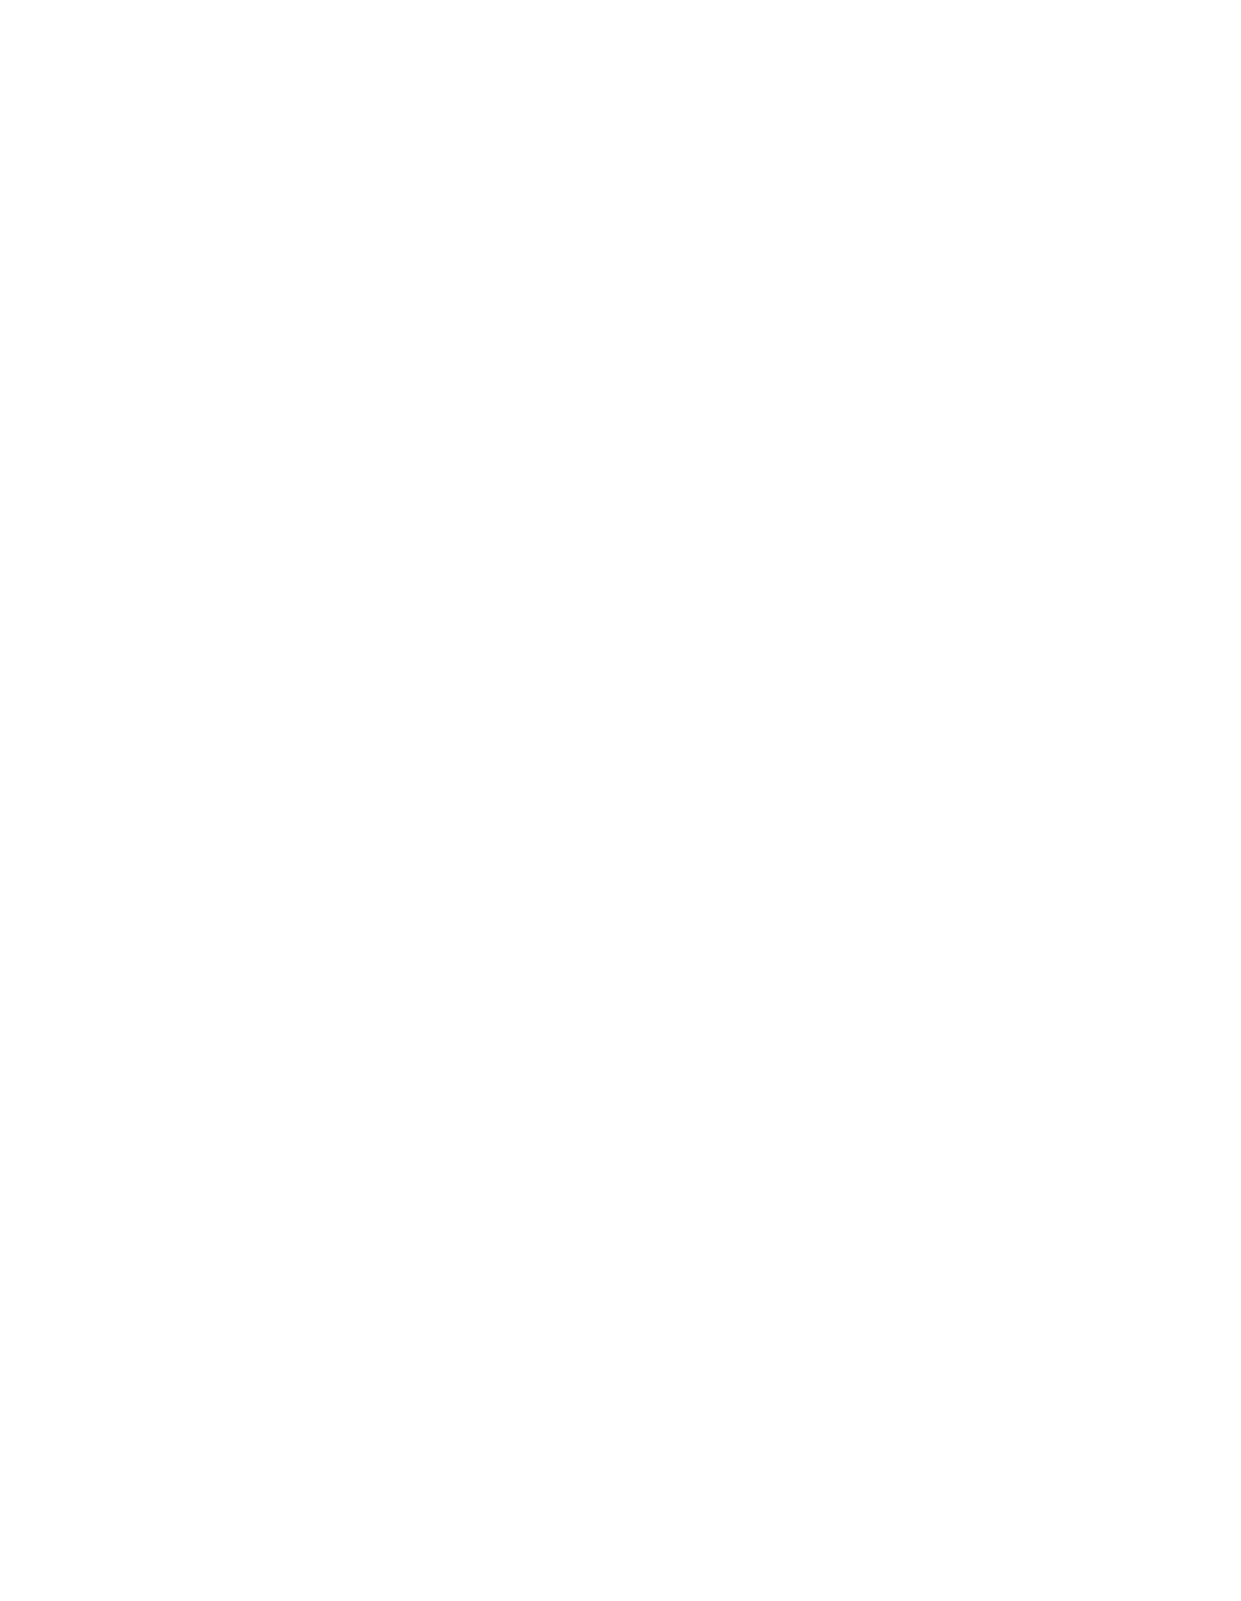 Four Moon Productions